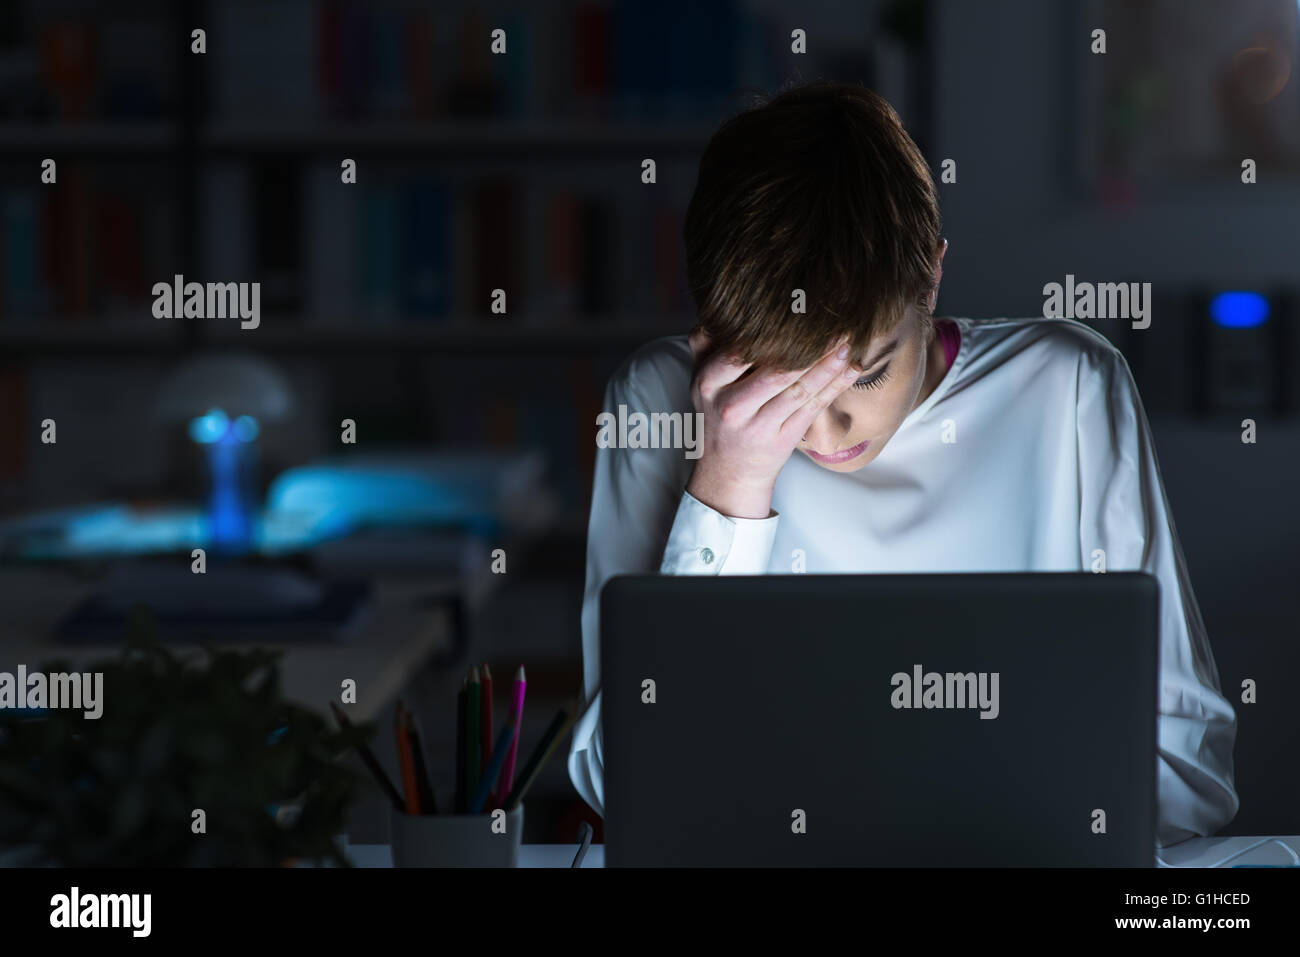 Tired woman working late at night, she is using a laptop and touching her forehead, stressful life and deadlines concept Stock Photo